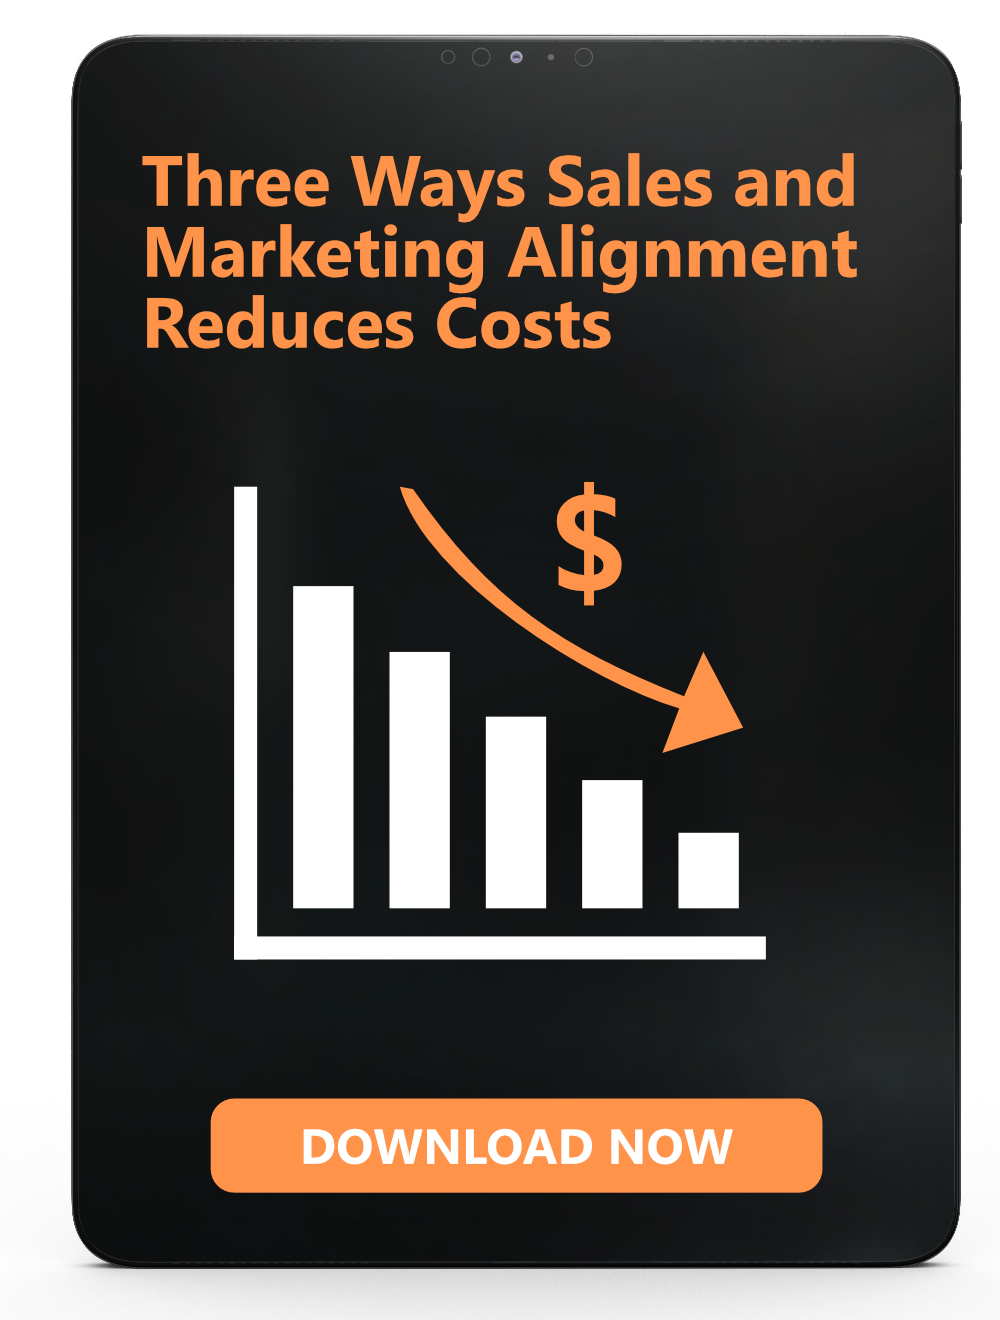 Three Ways Sales and Marketing Alignment Reduce Costs